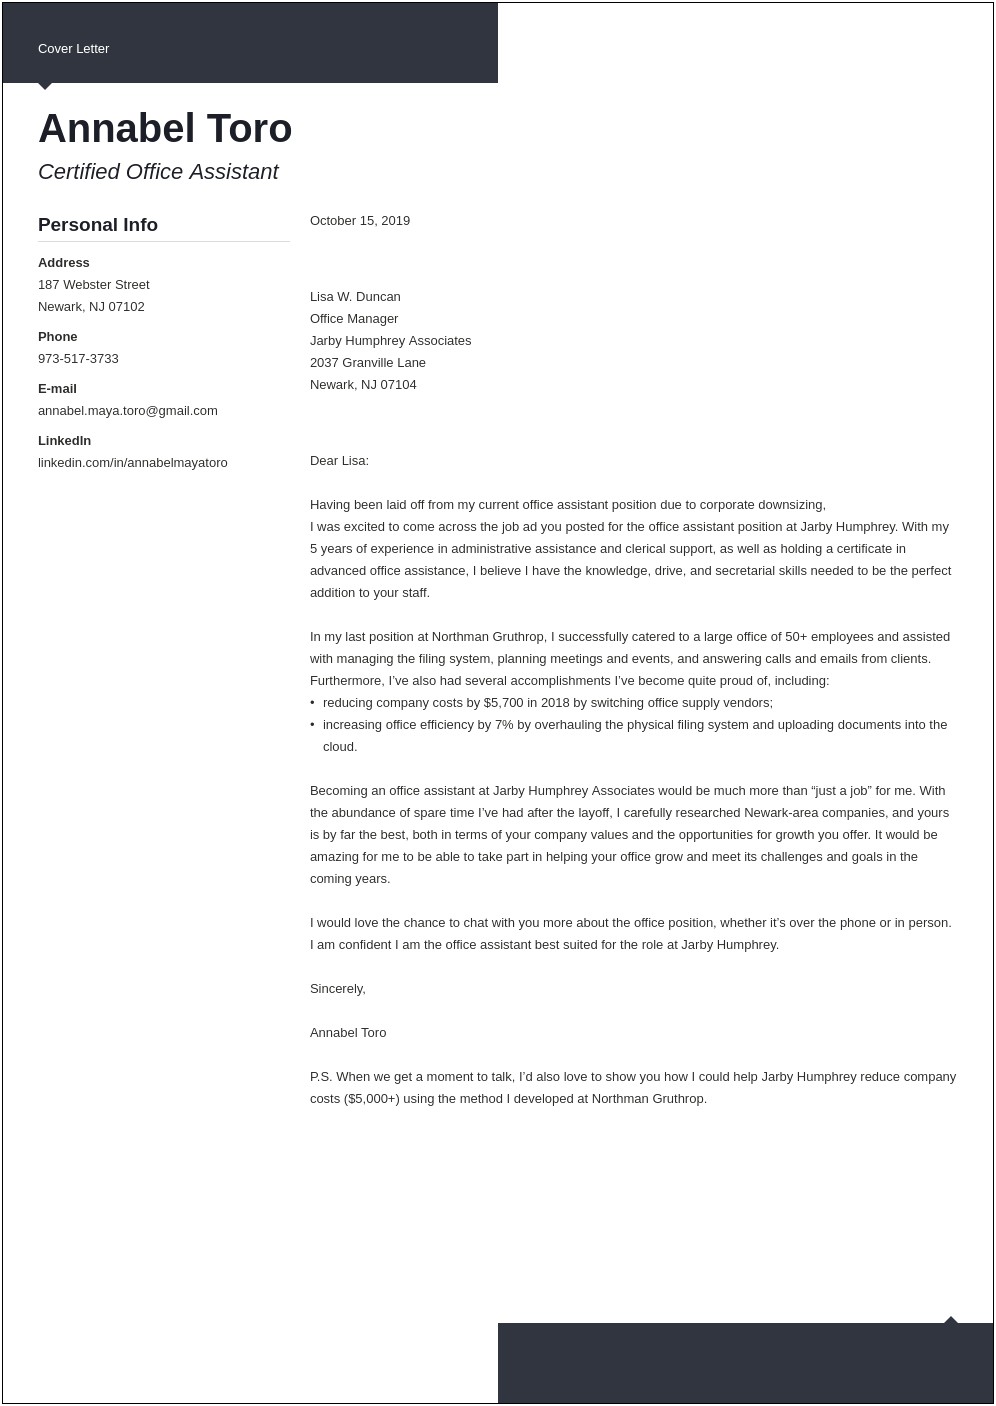 Job Application Resume Cover Letter Examples